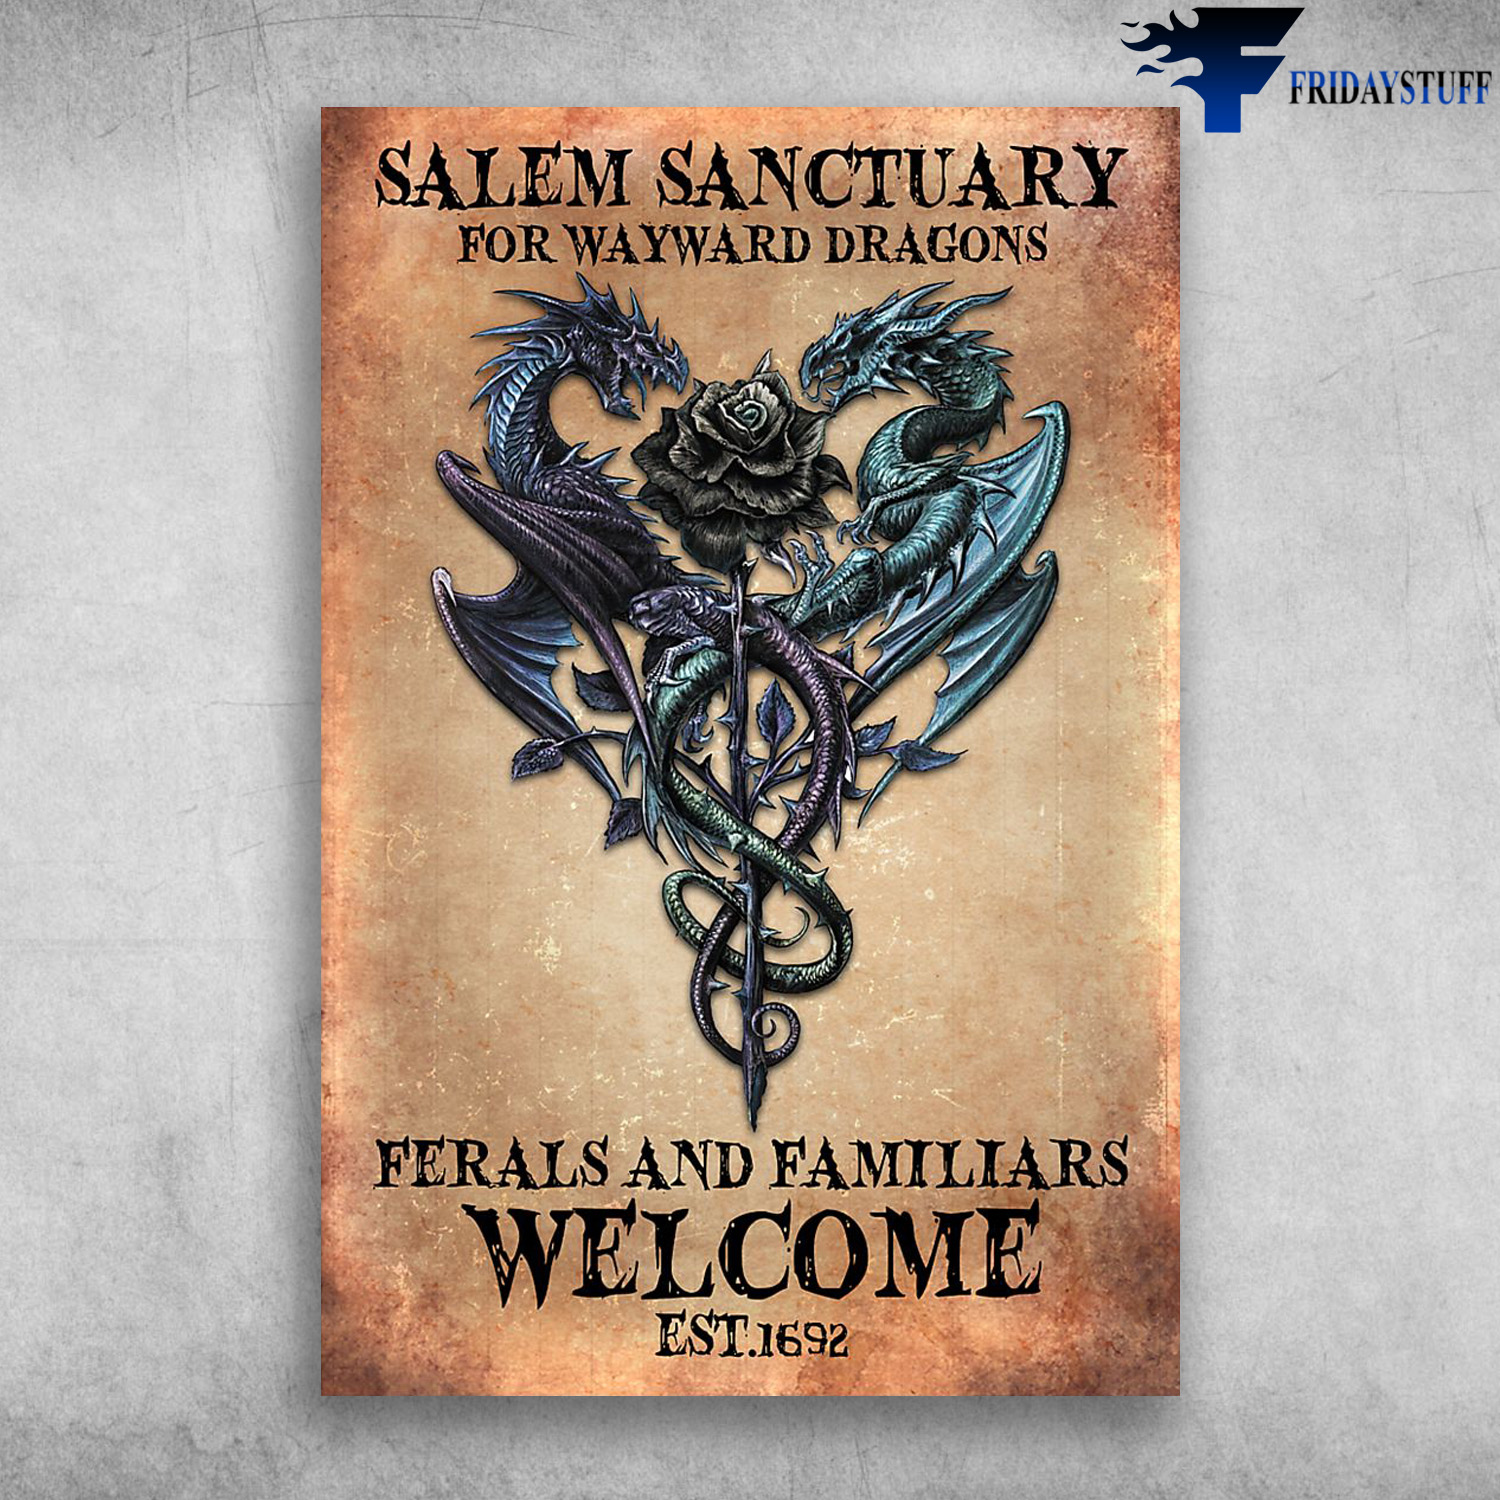 Dragon Salem Sanctuary For Wayward Dragons Ferals And Familiars Welcome Est 1692